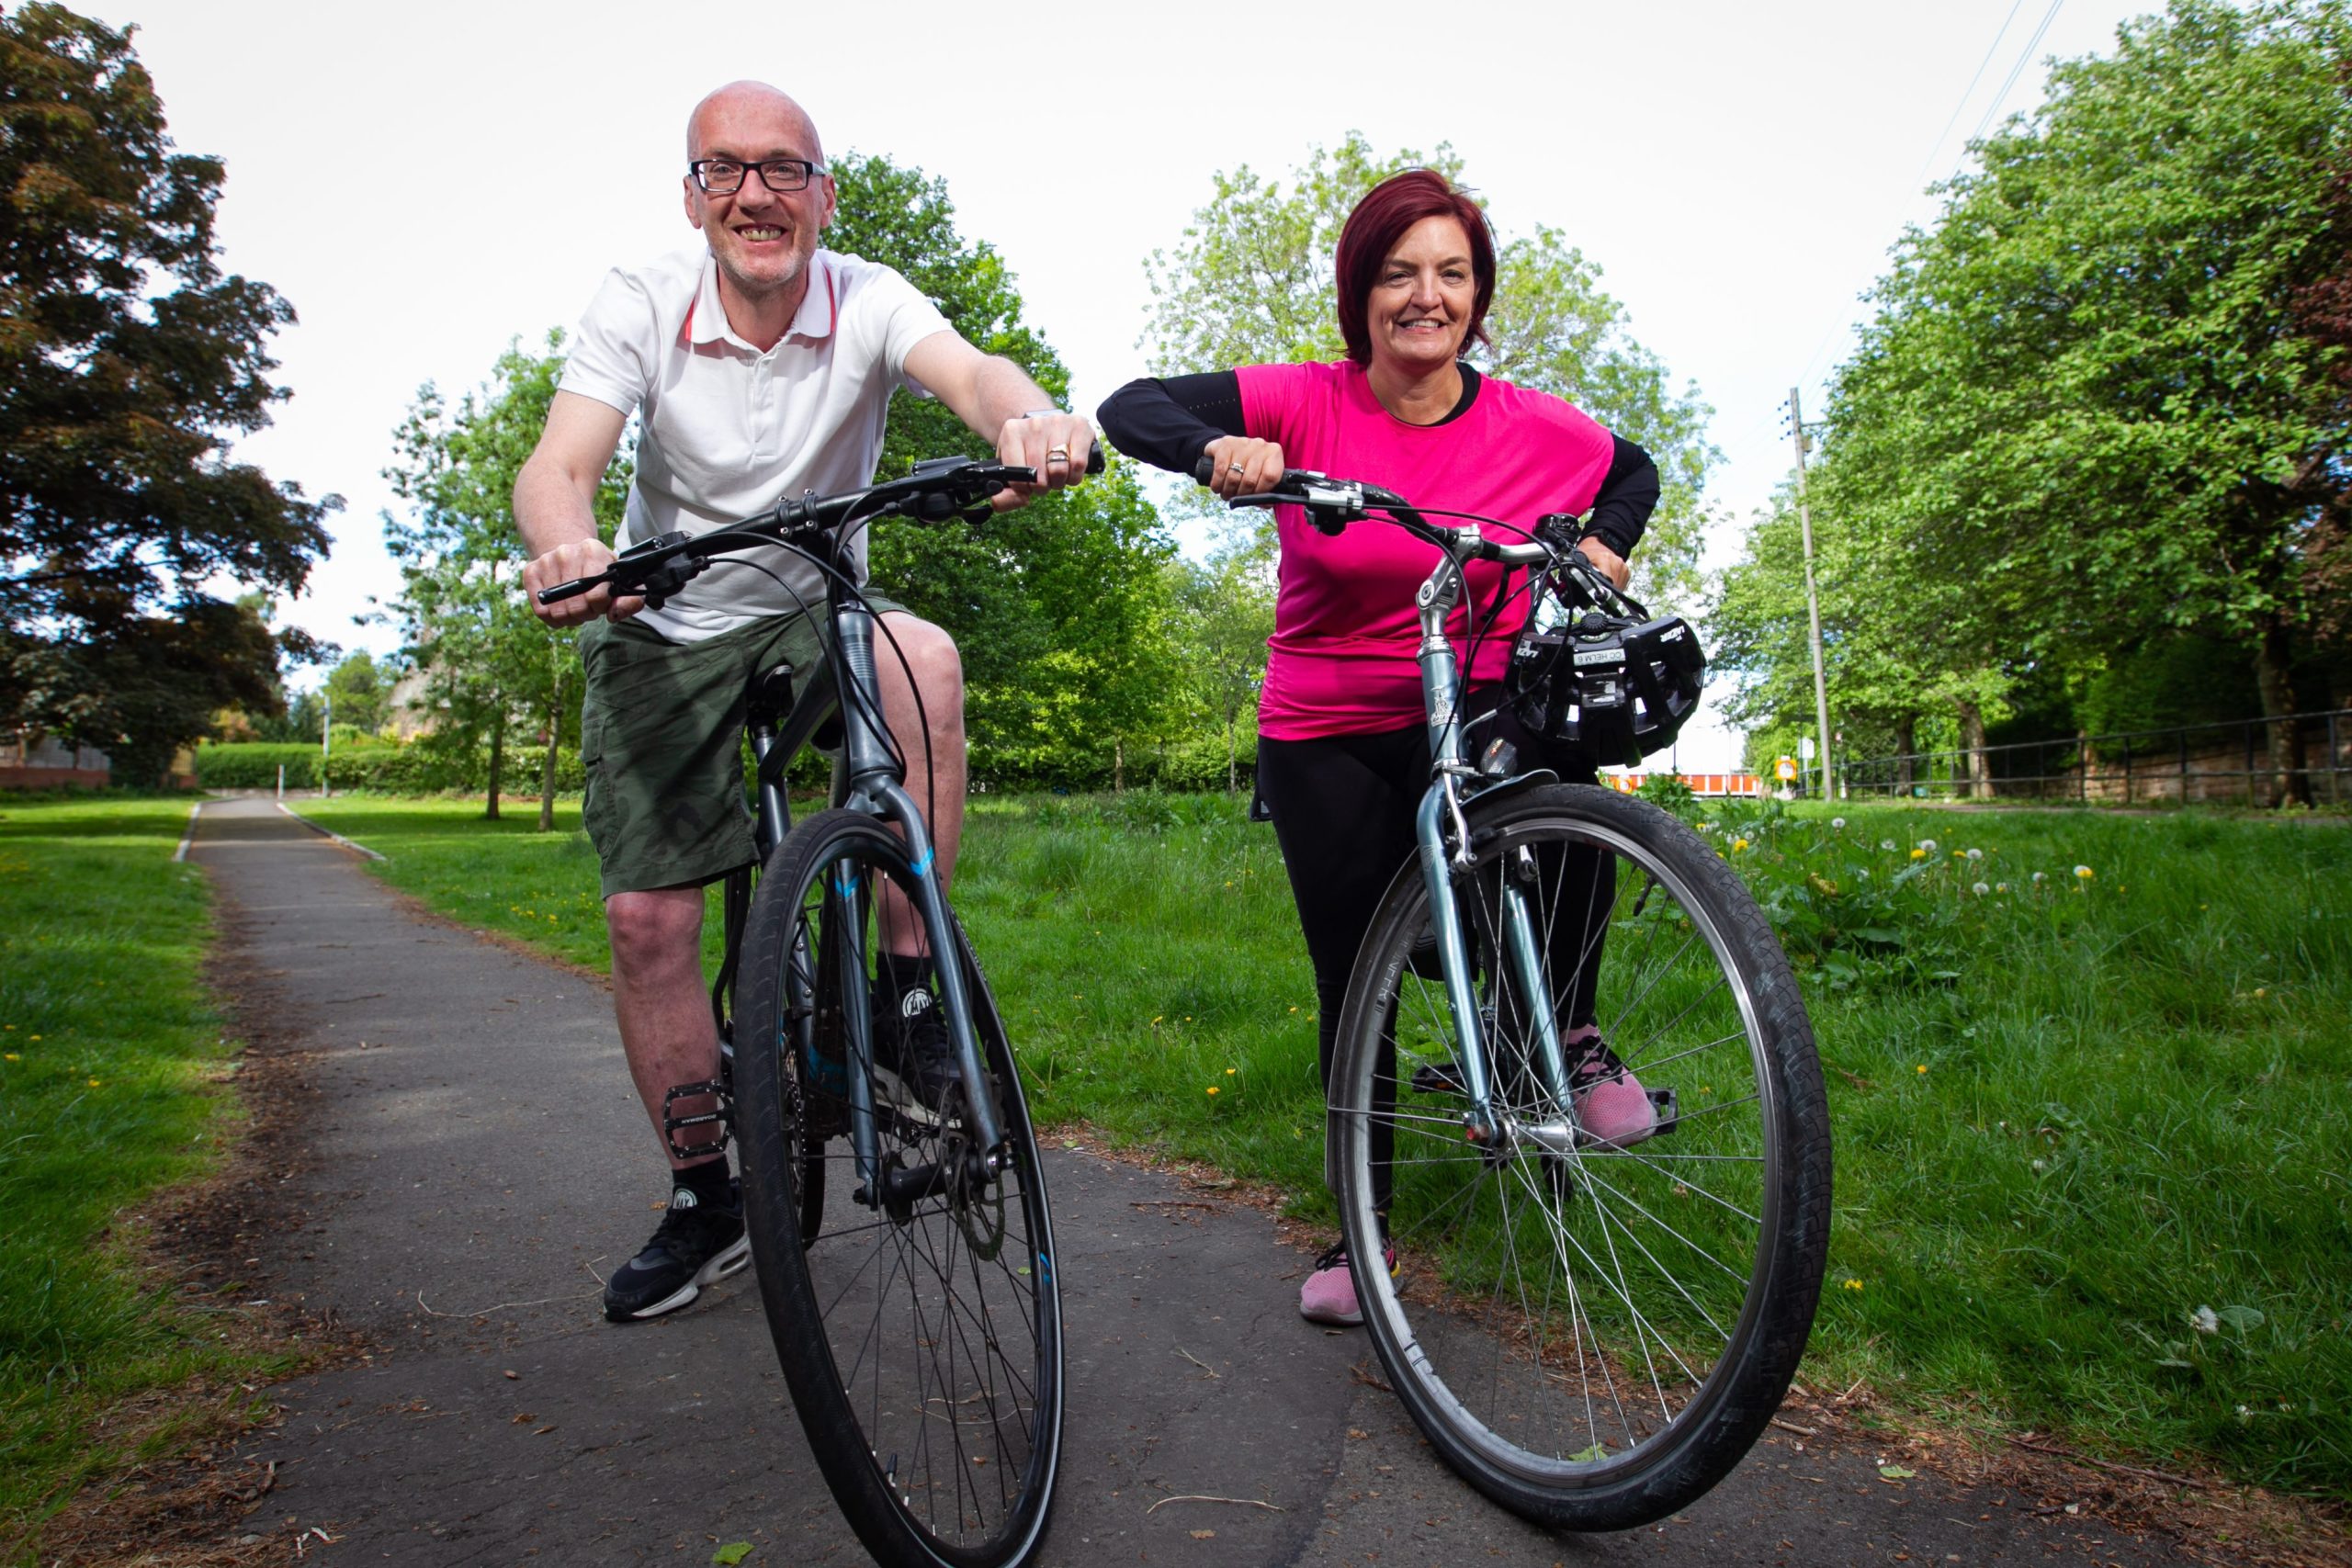 Postman Pat Mutter and charity service manager wife Sandra enjoying                        their weekend cycle around Glasgow